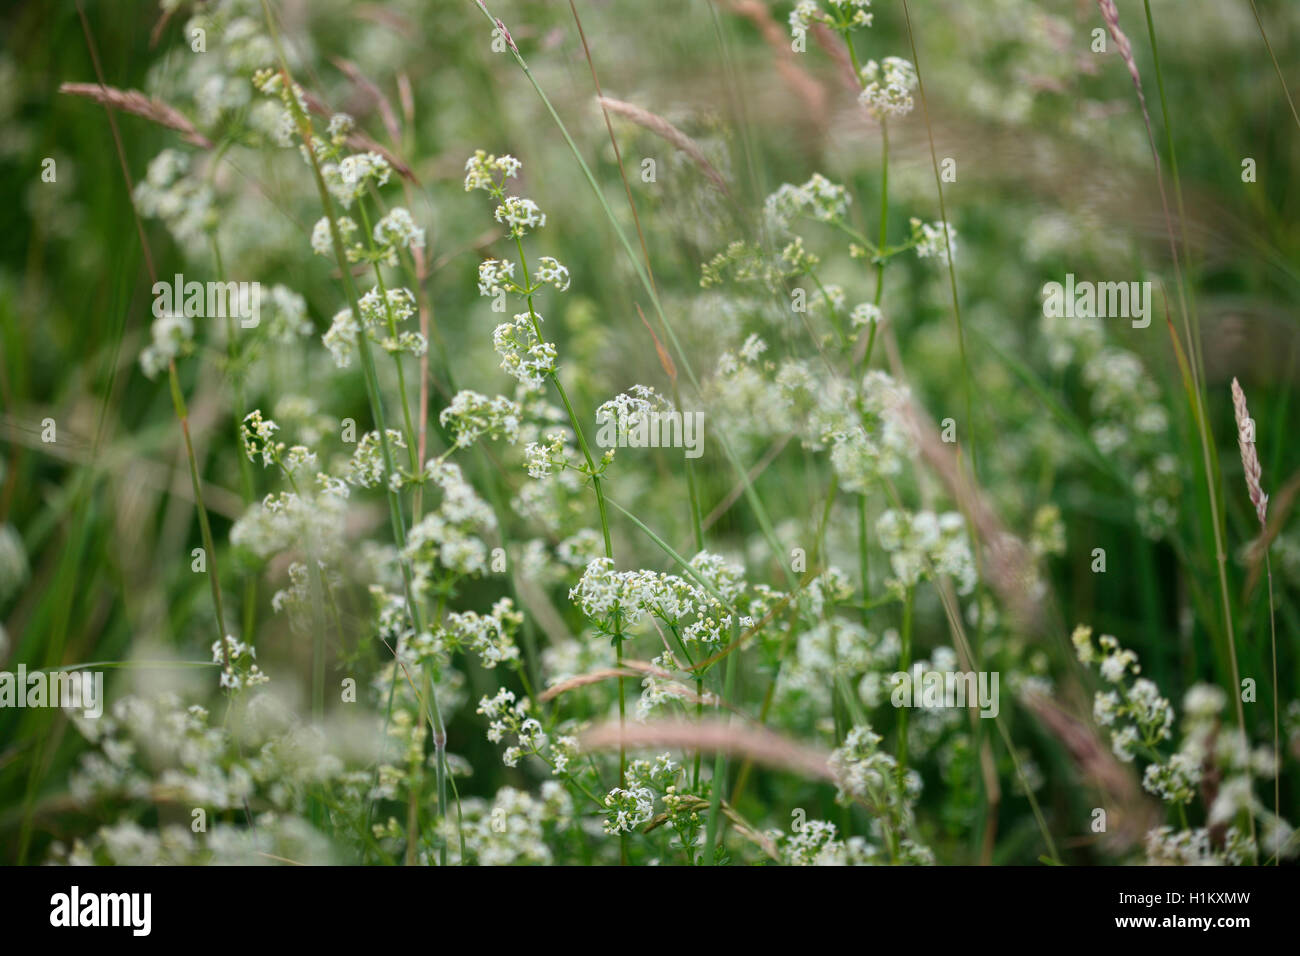 english hedge bedstraw this plant was once used to curdle milk for making cheese Jane Ann Butler Photography JABP1362 Stock Photo